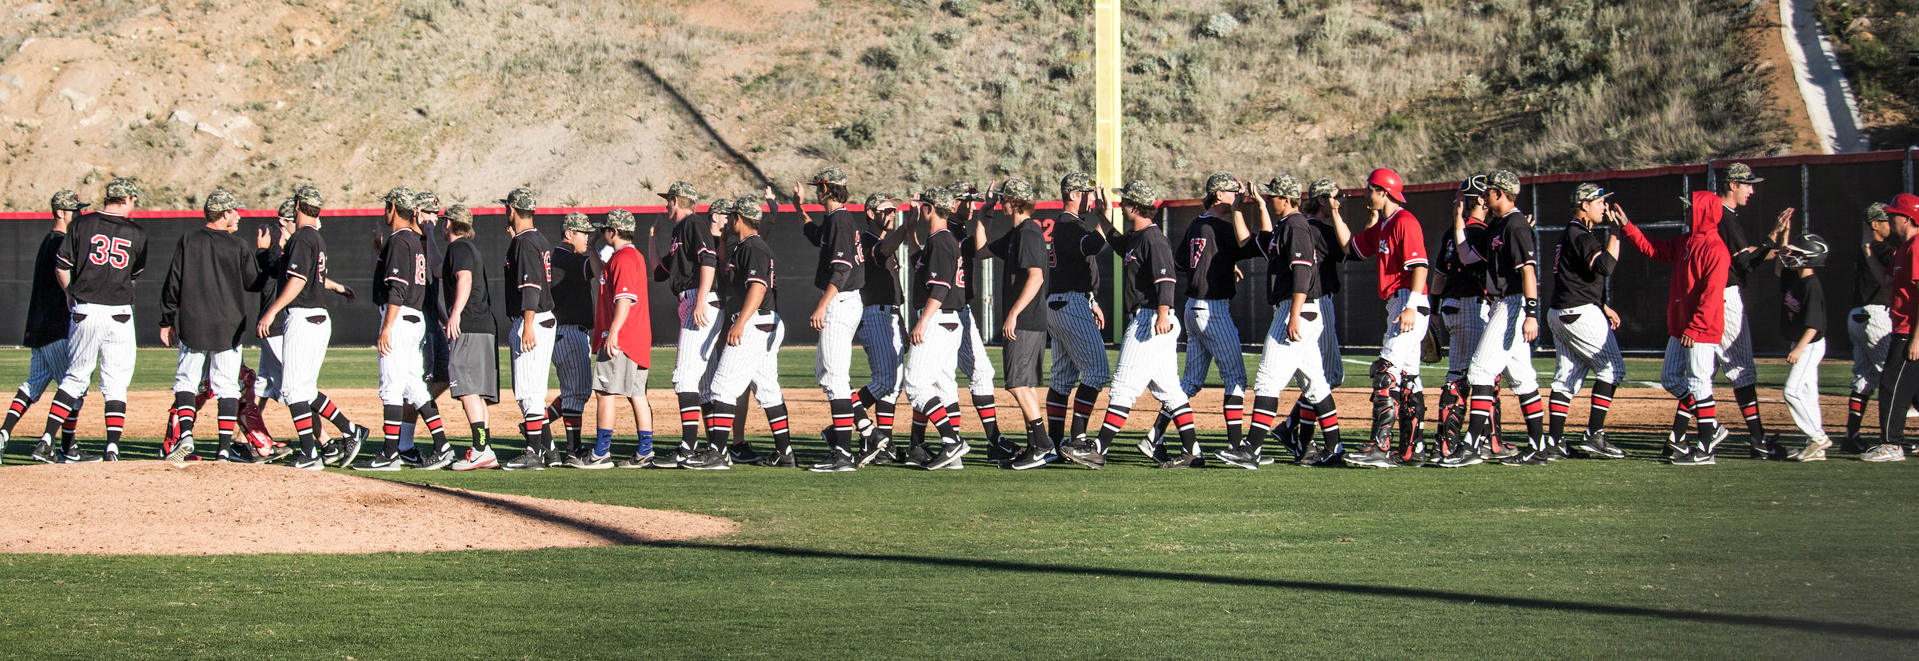 Baseball players from Palomar and Fullerton congratulate each other on a baseball field after Palomar wins at 7–5.